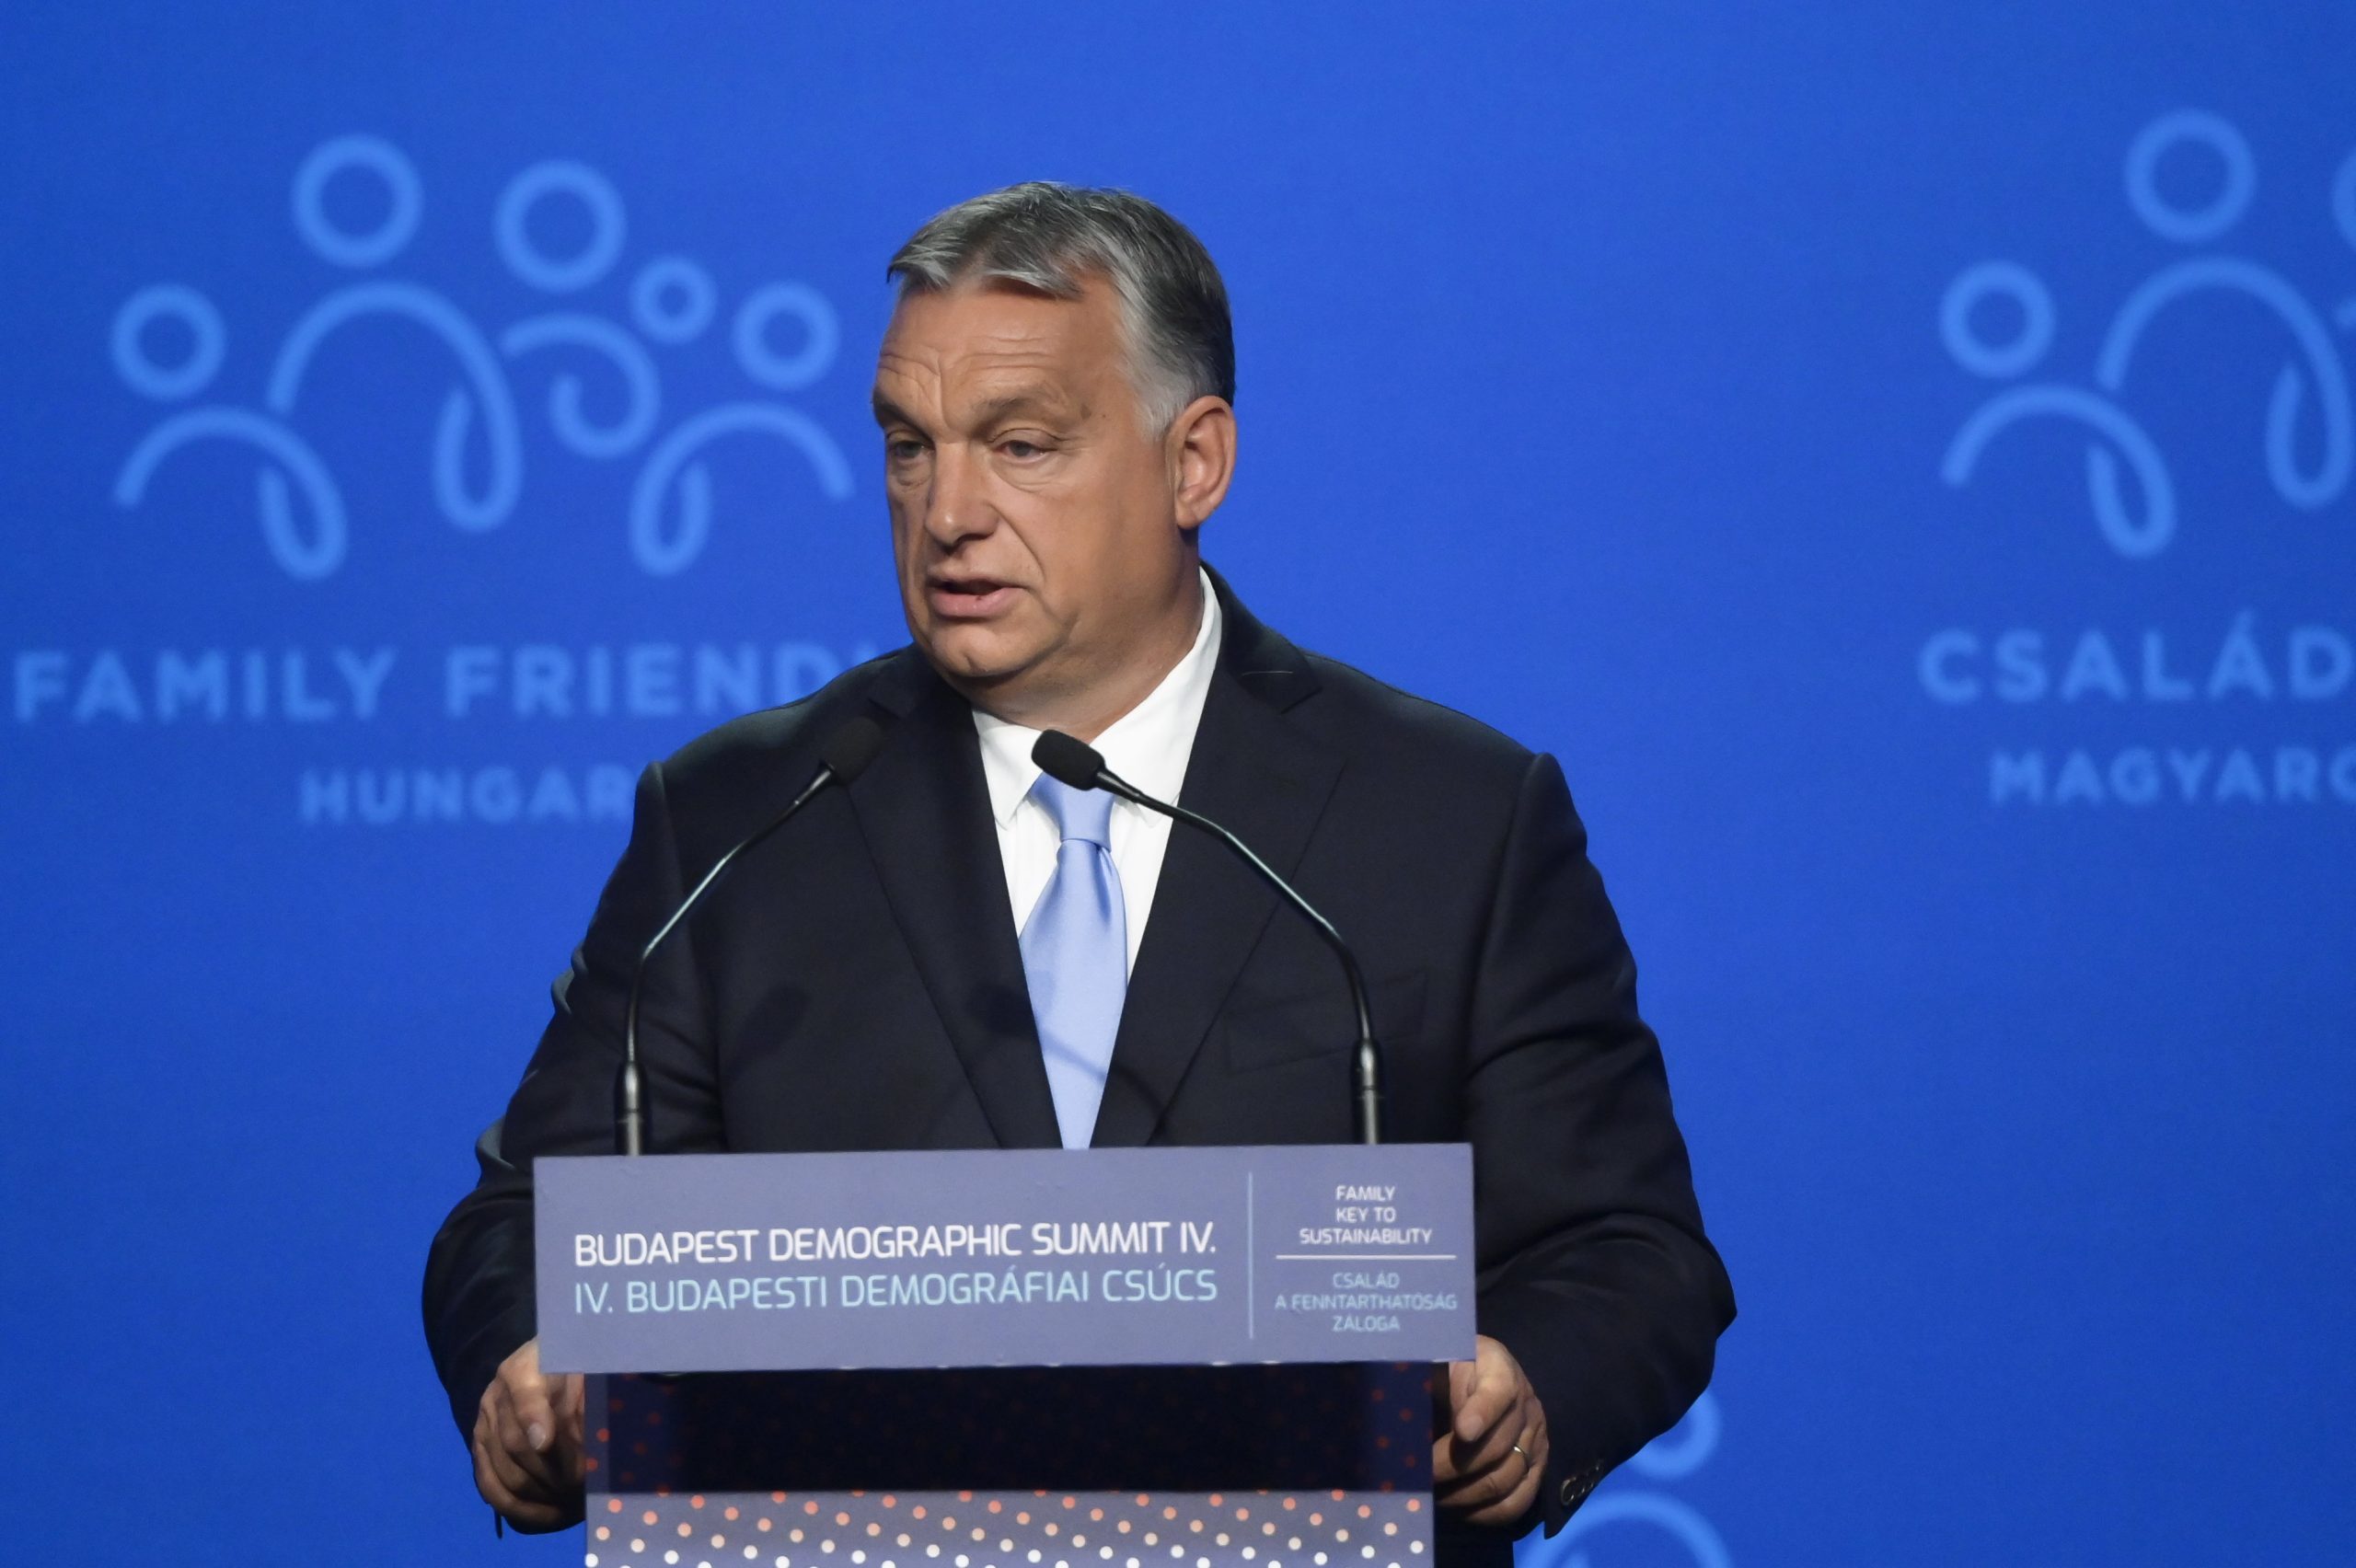 Press Roundup: Family Values at the Budapest Demographic Summit